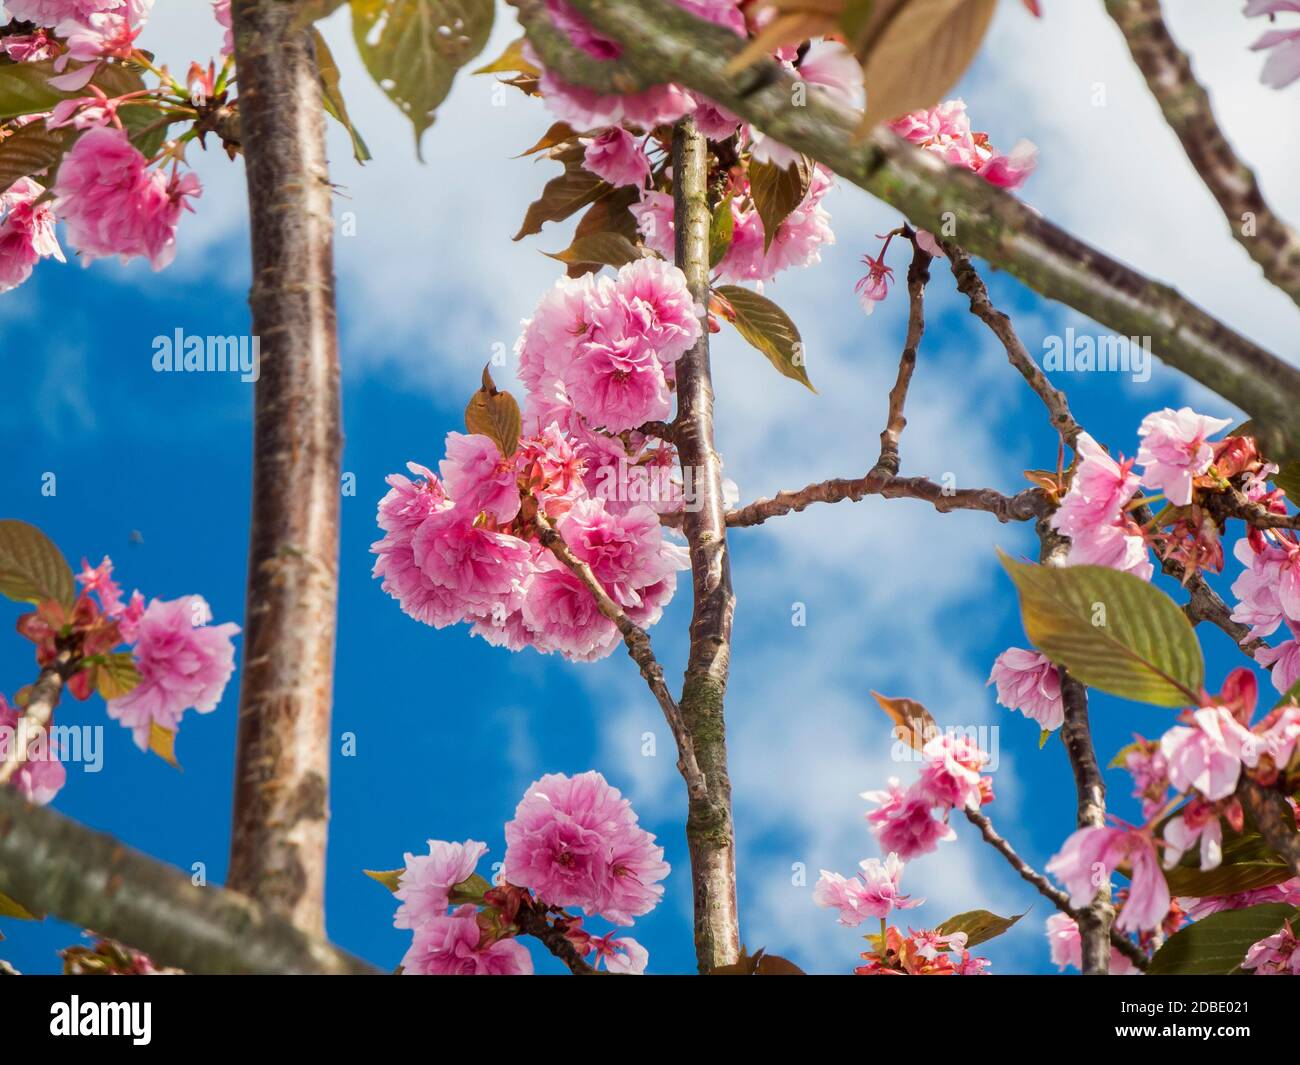 Low angle view closeup of individual cherry blossoms on several branches and twigs against a blue sky with white clouds in Brandenburg / Germany. Stock Photo